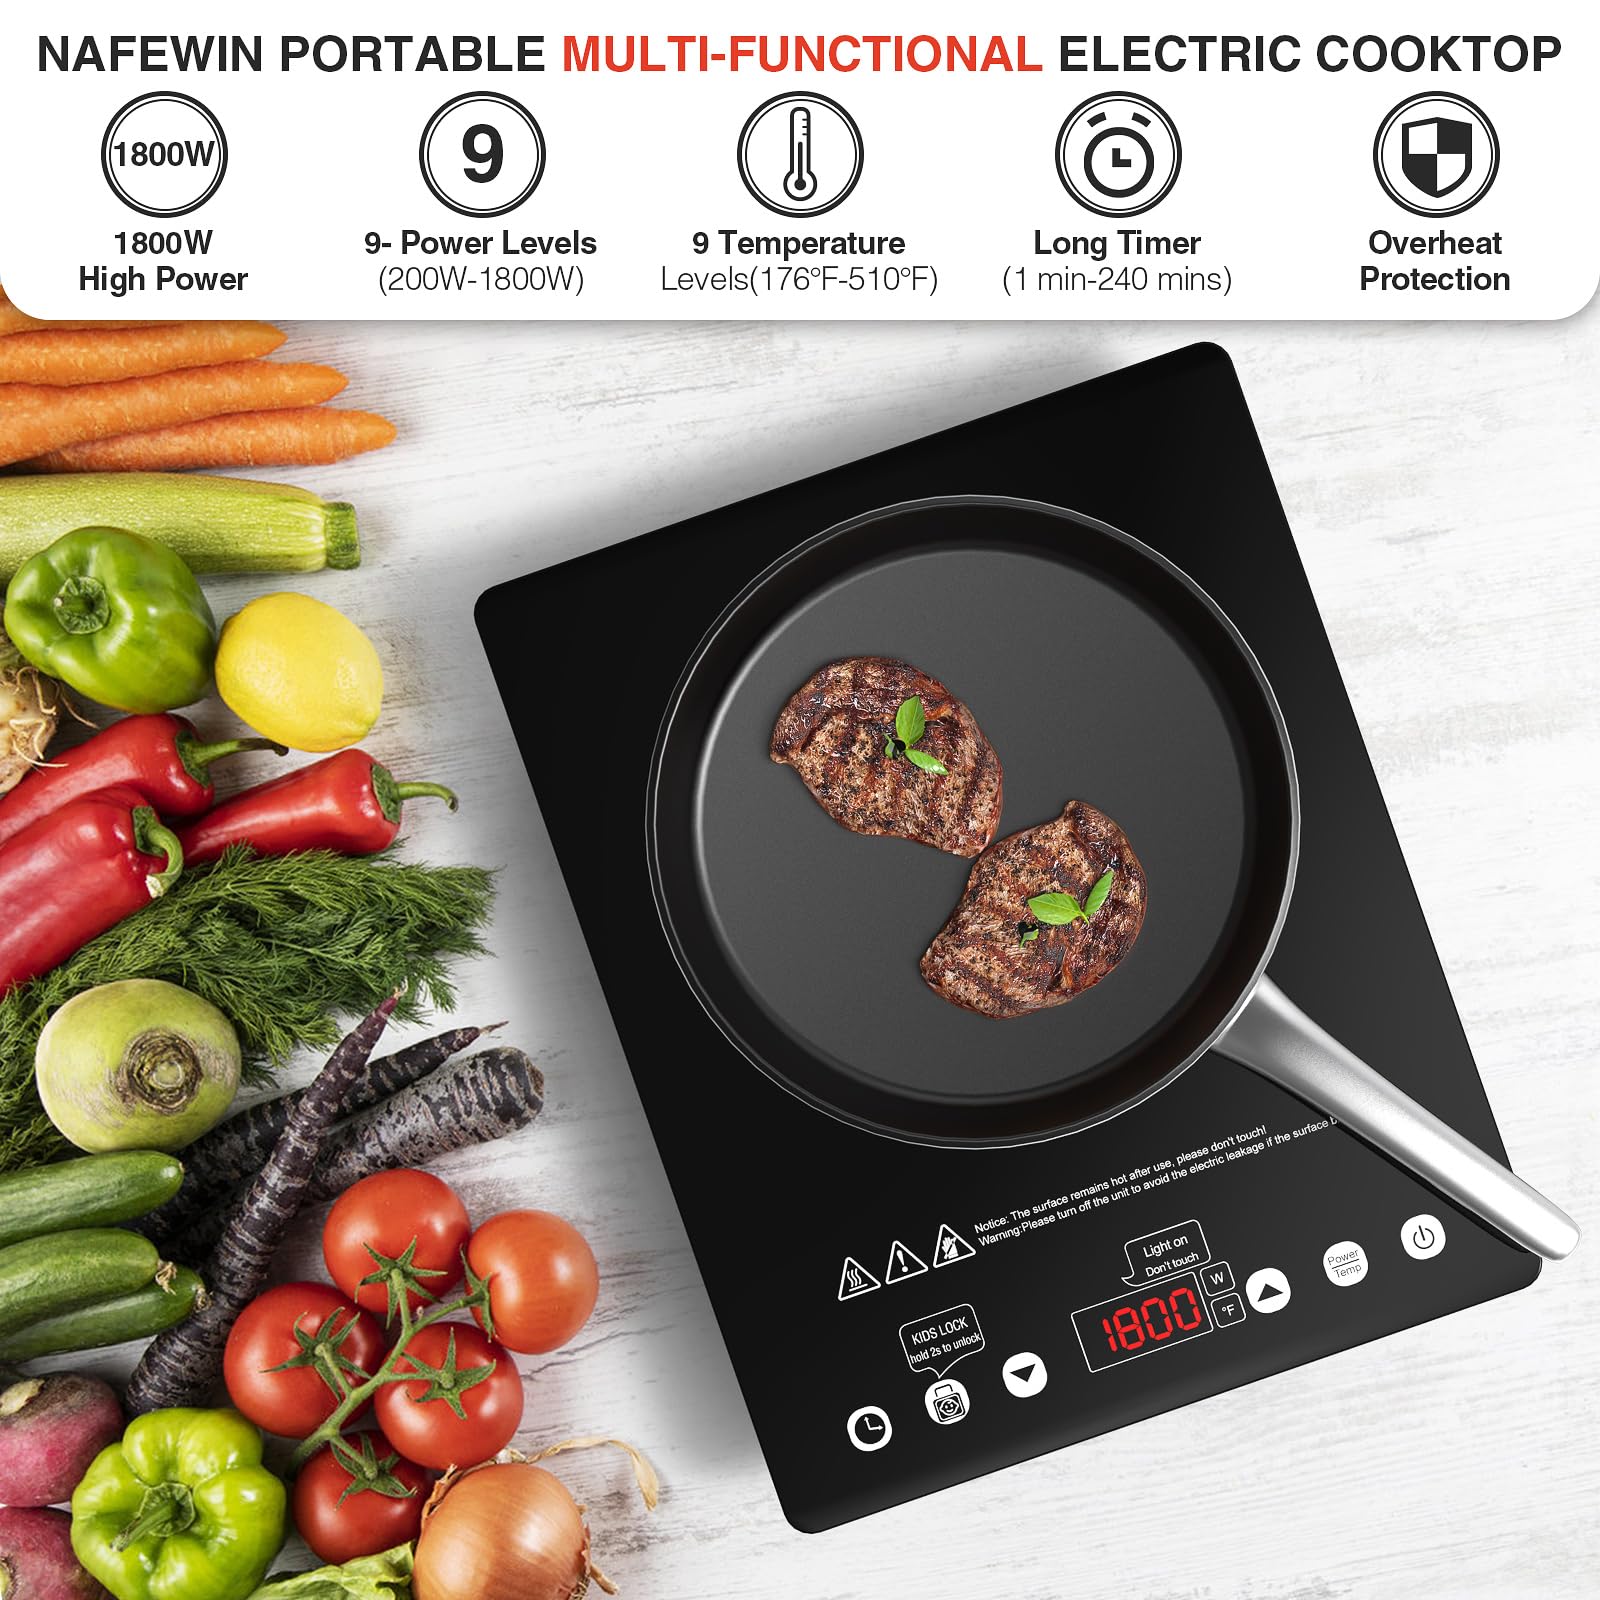 Electric Cooktop Single Burner, 1800W Electric Stove Top Portable, Electric Hot Plate 110v Plug in Countertop,Child Safety Lock,Timer,9 Power Level, Compatible for All Cookware, Induction Cookotp